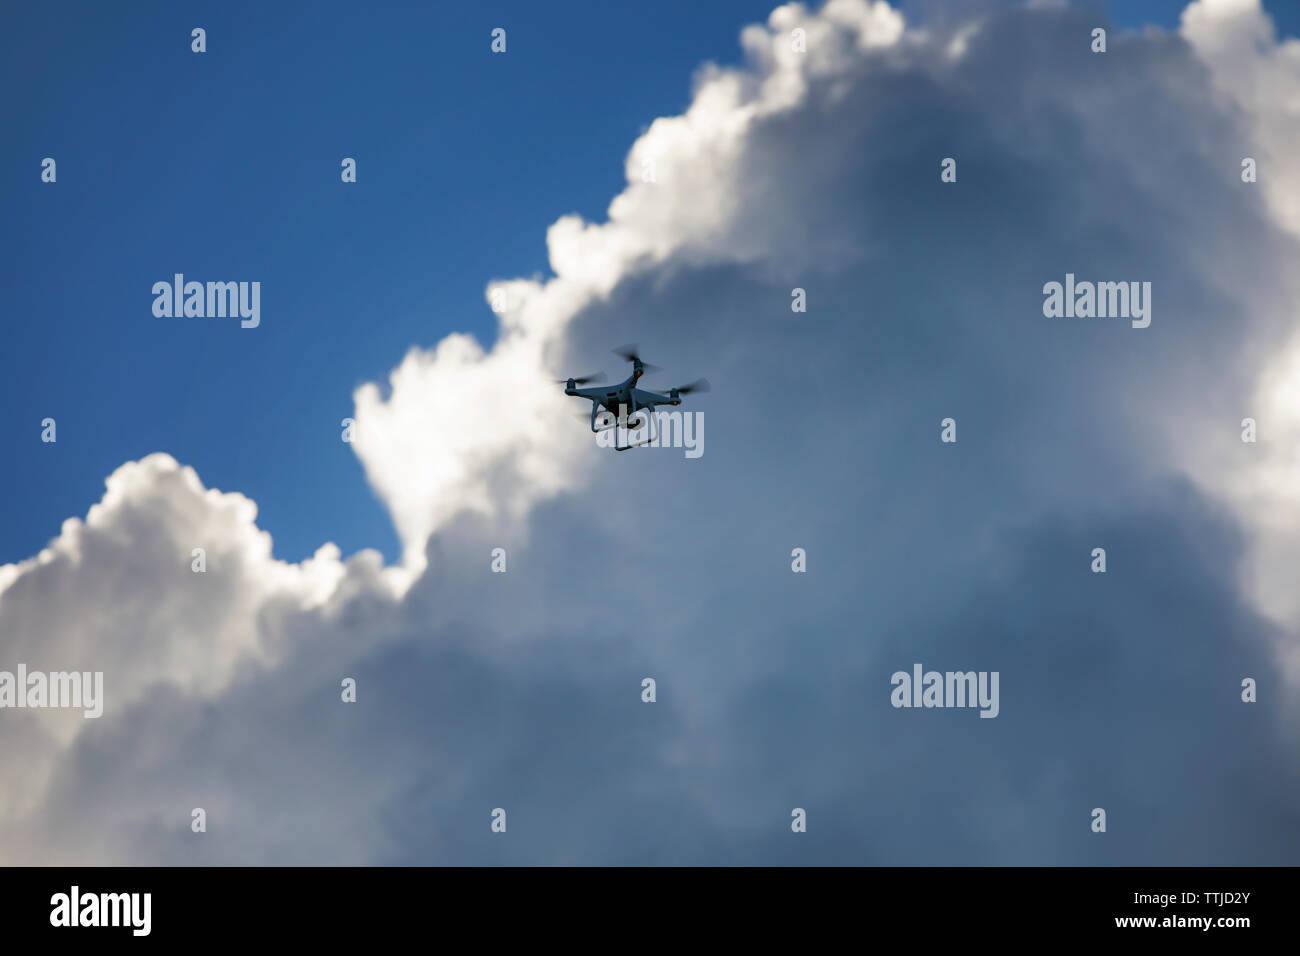 Low angle view of quadcopter against cloudy sky Stock Photo